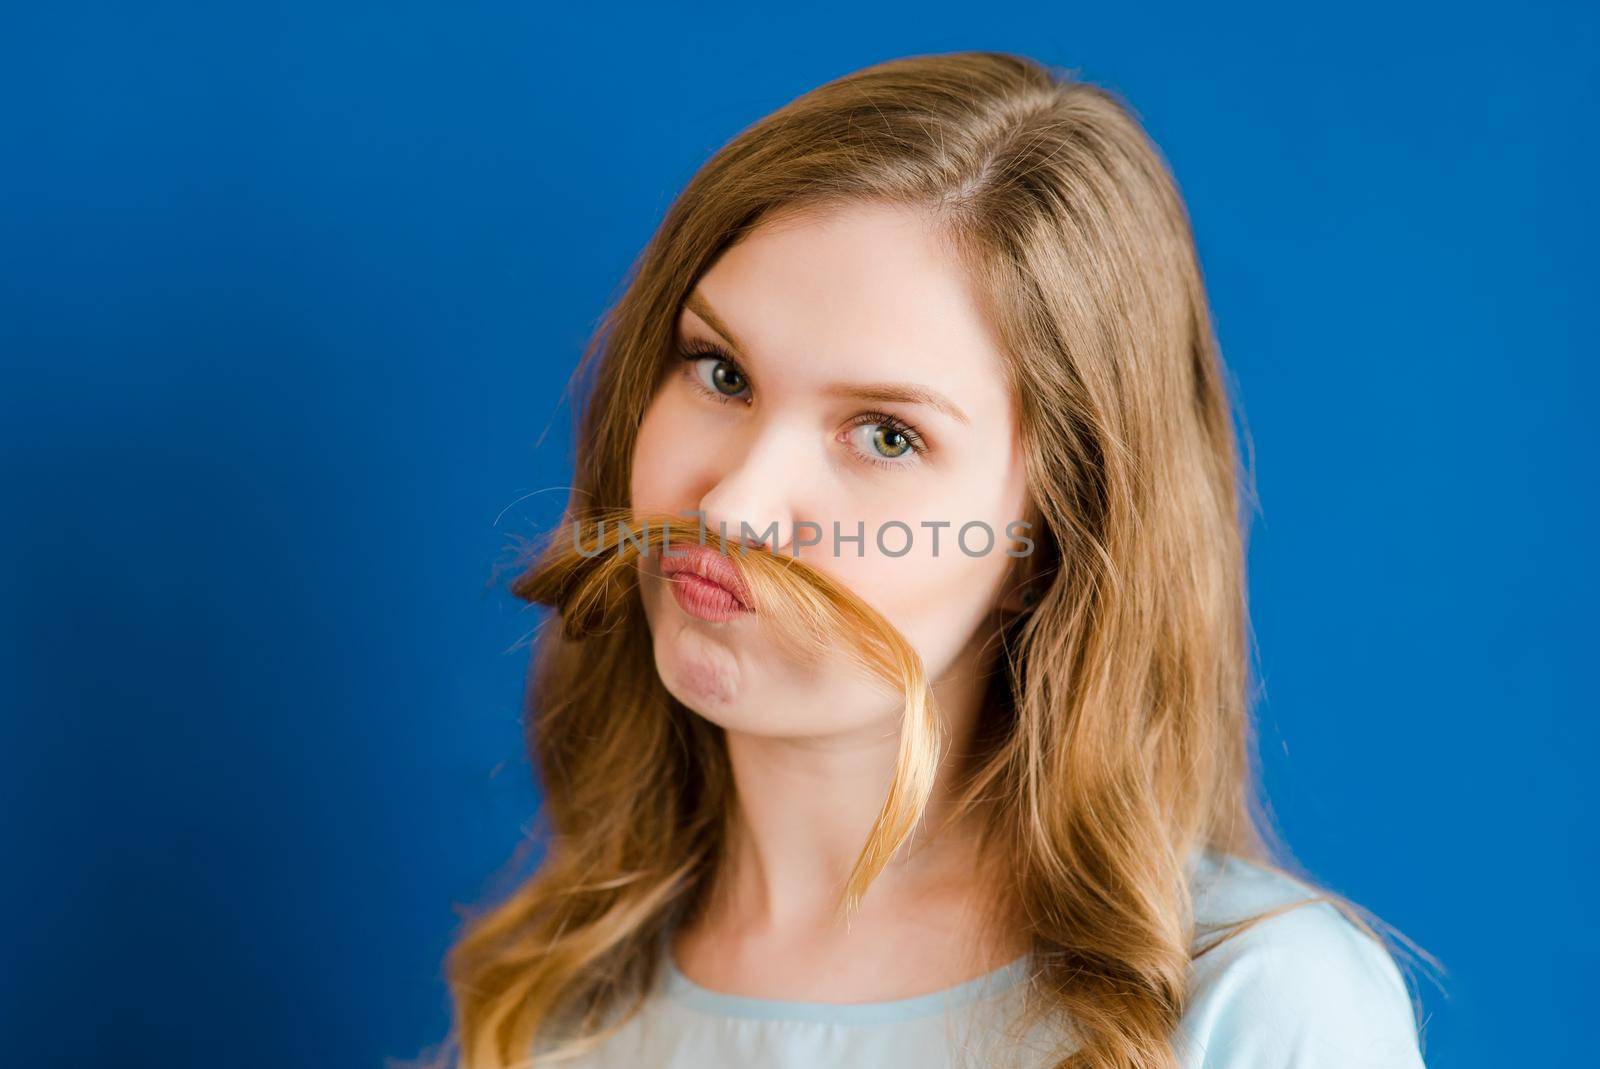 A girl on a blue background has a mustache made of hair